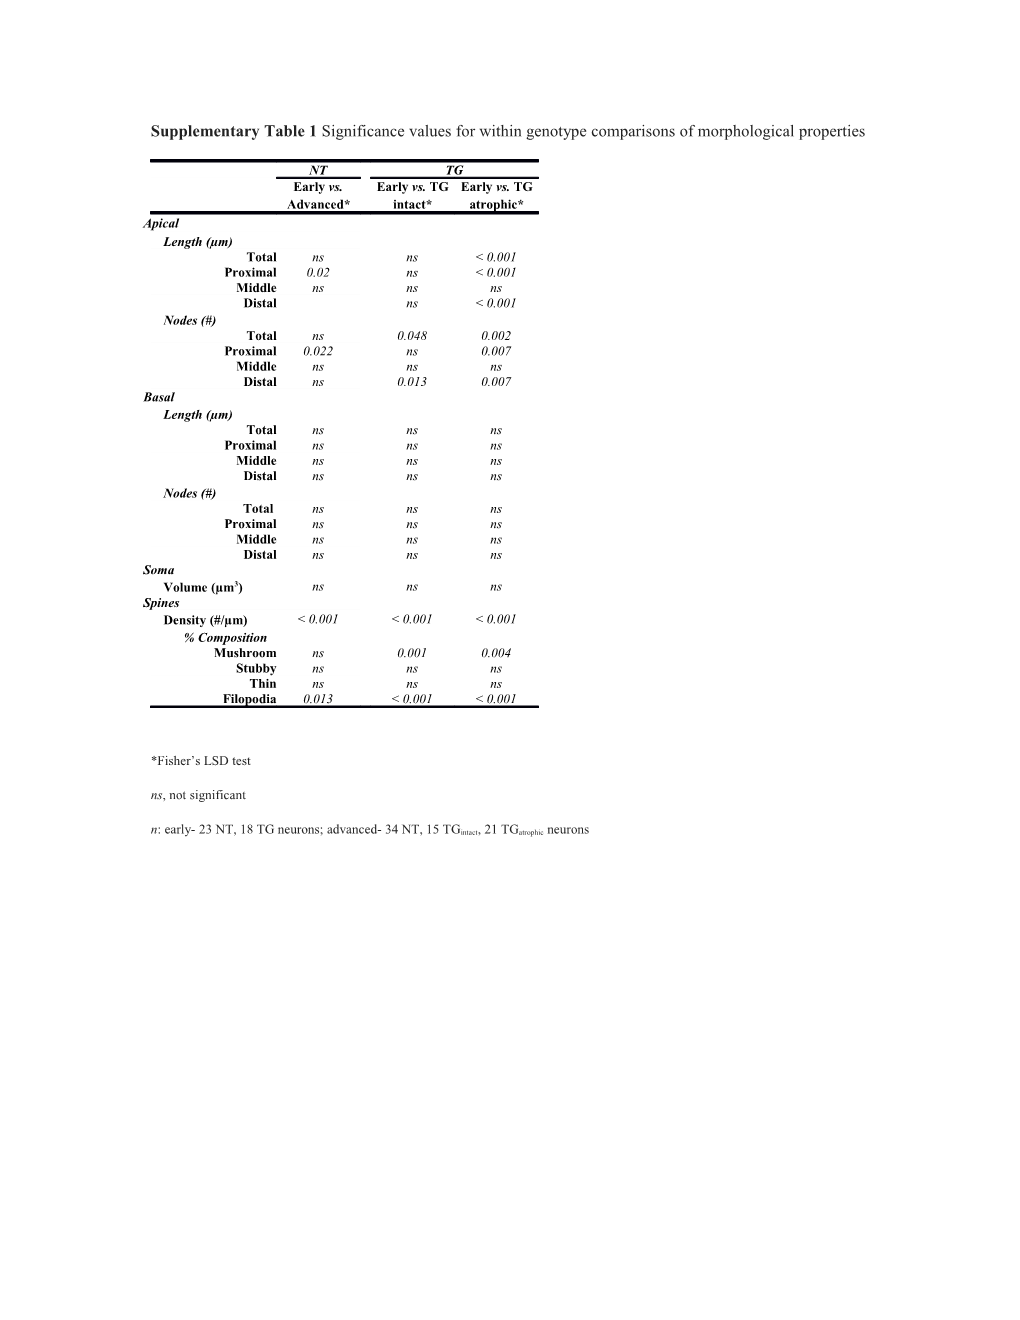 Supplementary Table 1 Significance Values for Within Genotype Comparisons of Morphological